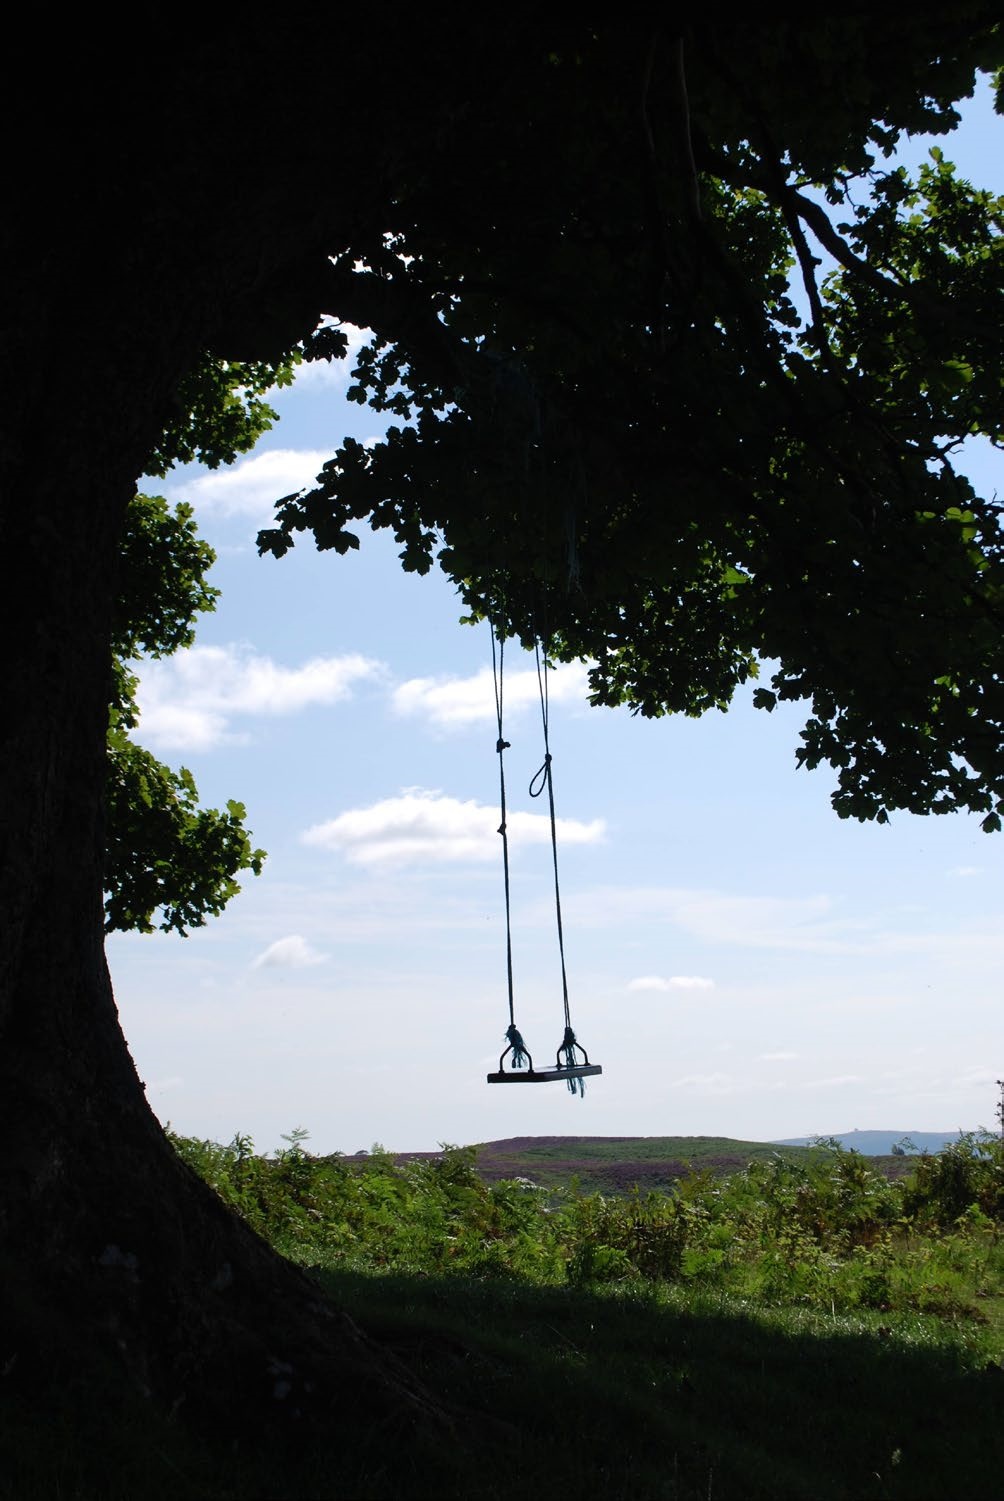 An empty swing hung from a tree